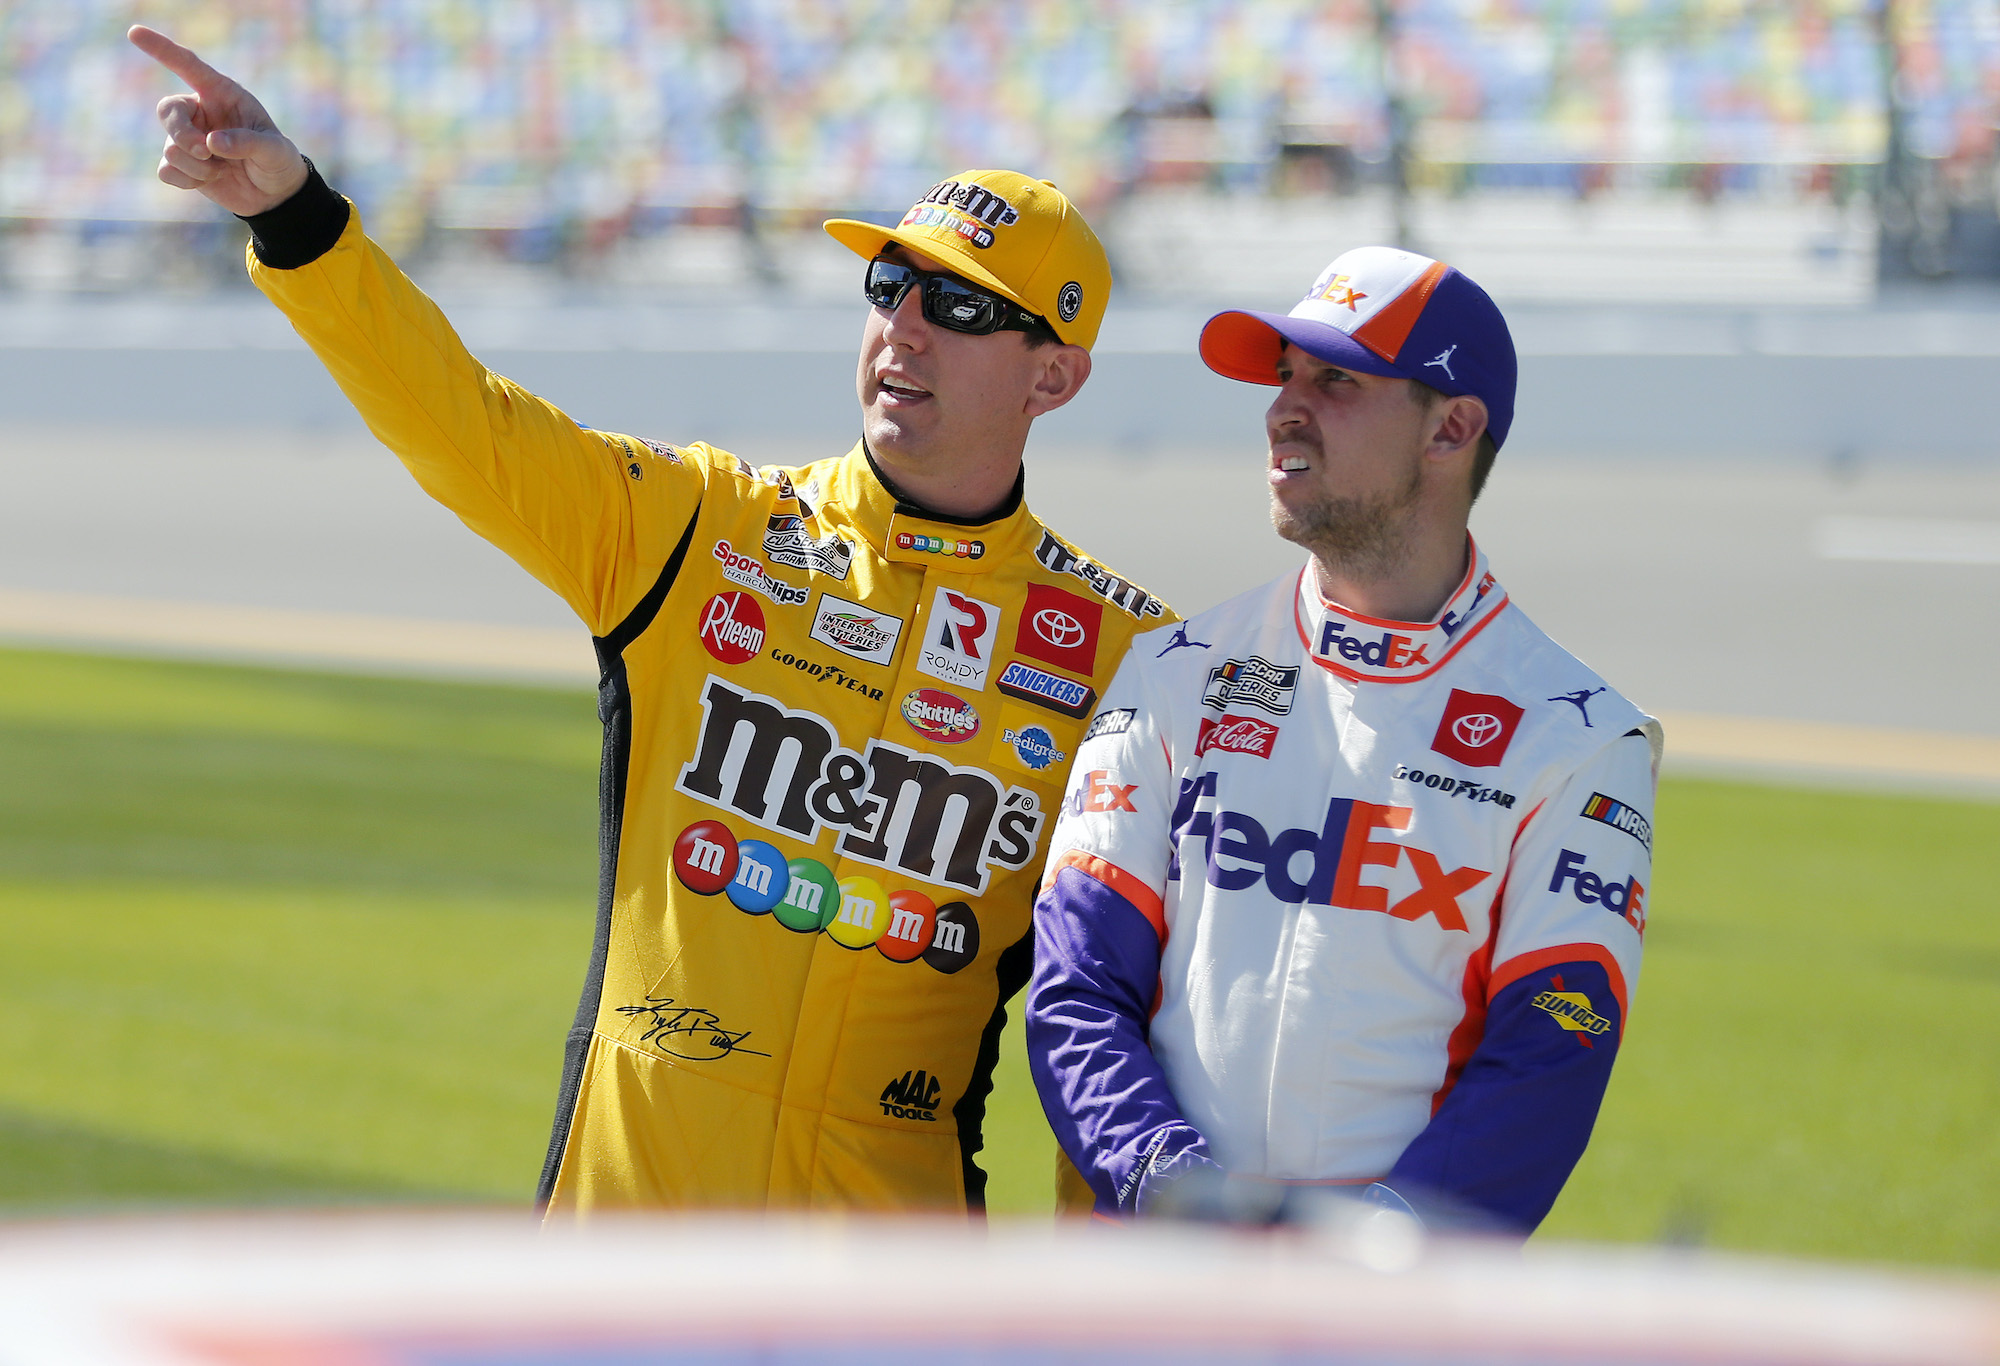 Kyle Busch Shows His Sense of Humor When He Pulls Off an Unexpected Move Behind Denny Hamlin’s Back on National Television